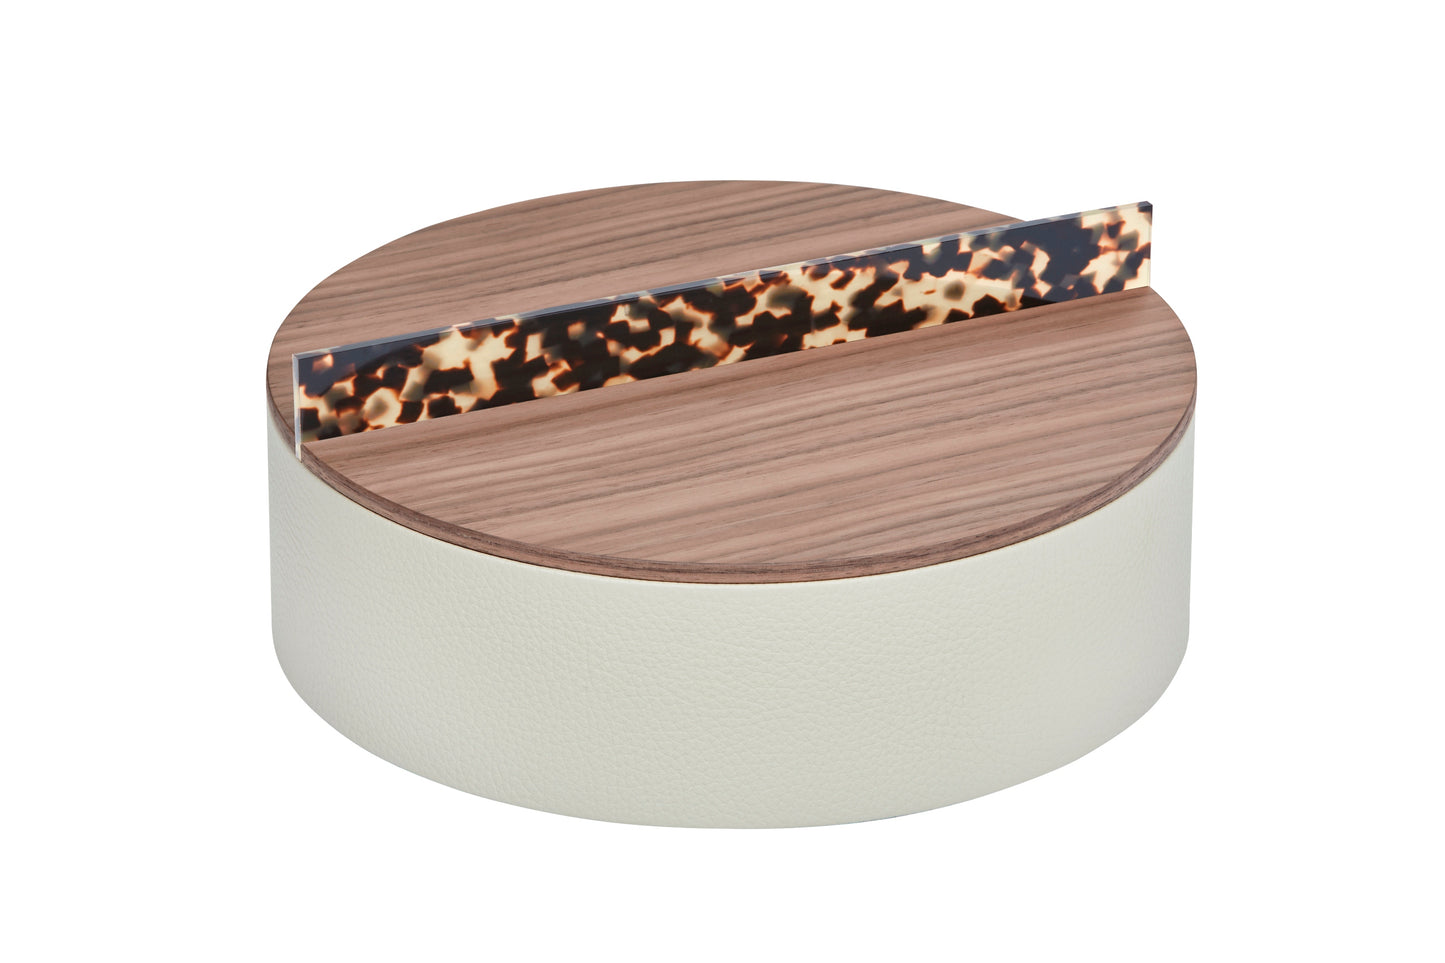 Riviere Dama Tortoise Round Box | Luxury Home Accessories, Elegant Decorative Boxes & Gift Items | 2Jour Concierge, #1 luxury high-end gift & lifestyle shop